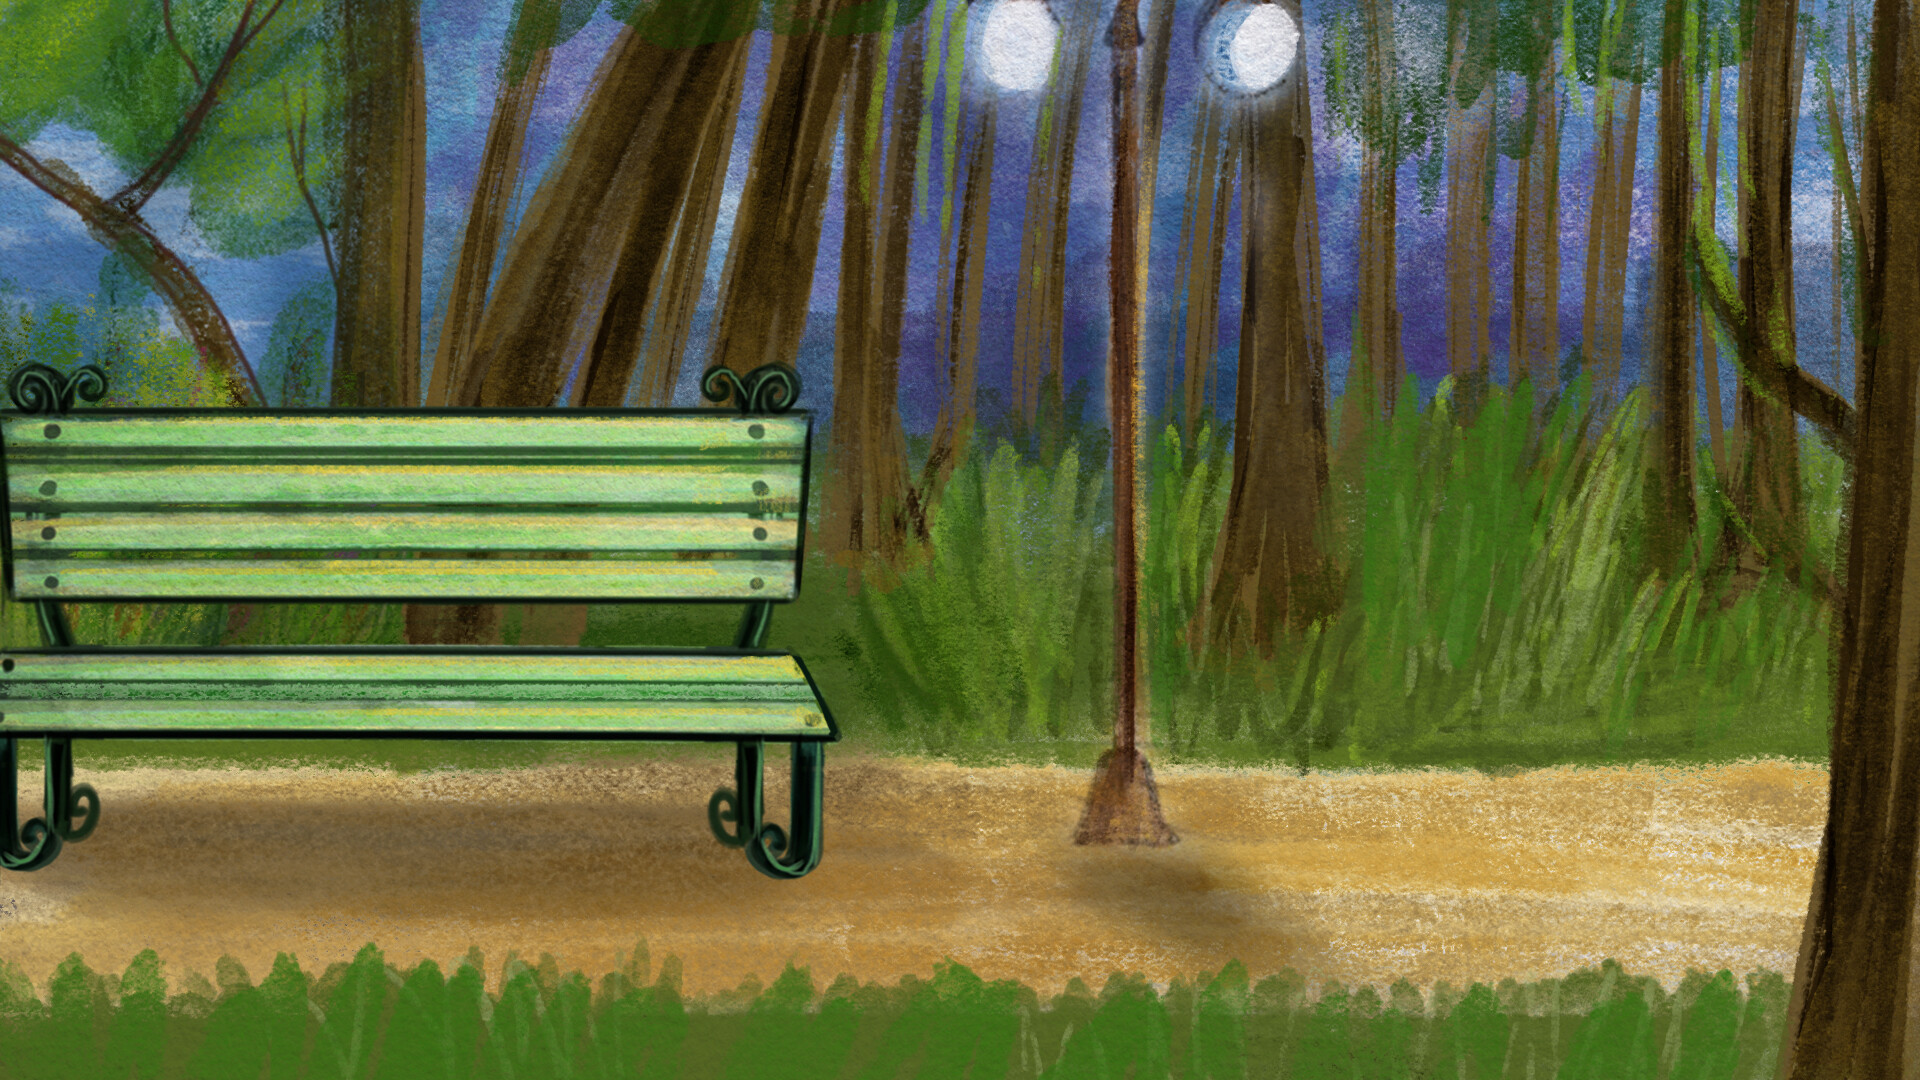 Visualize an anime girl sitting on a worn-out park bench in an abandoned